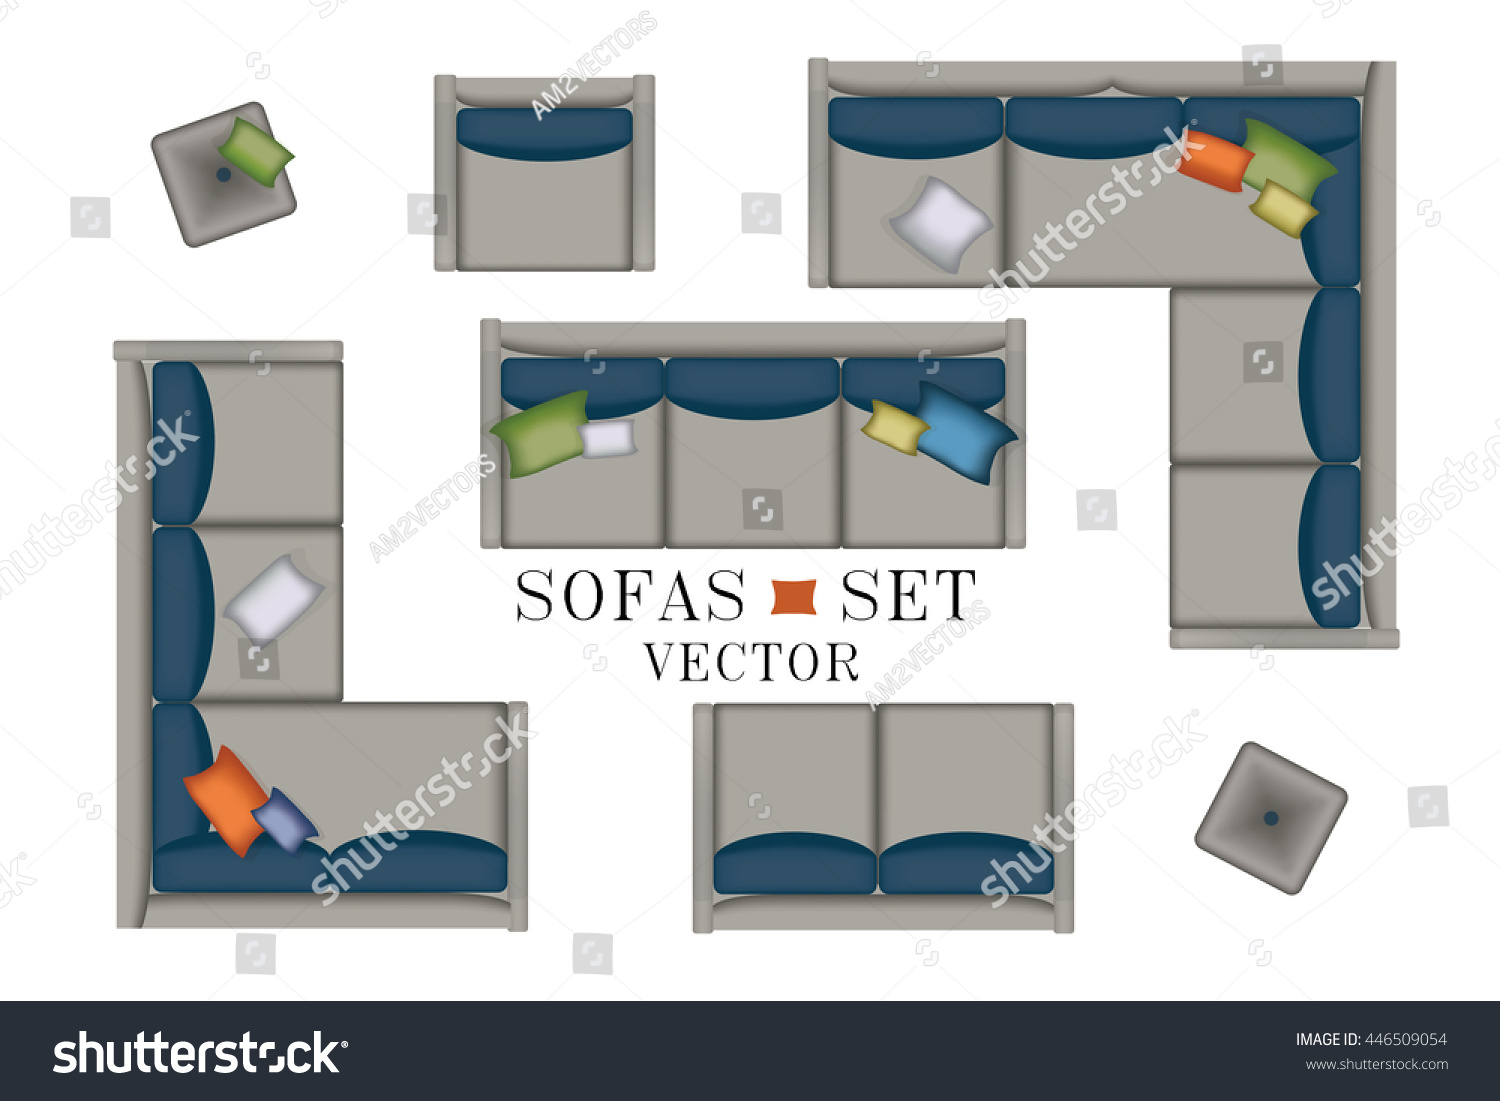 Top View Sofa Plan / Vector furniture icons top view with bed, sofa ...